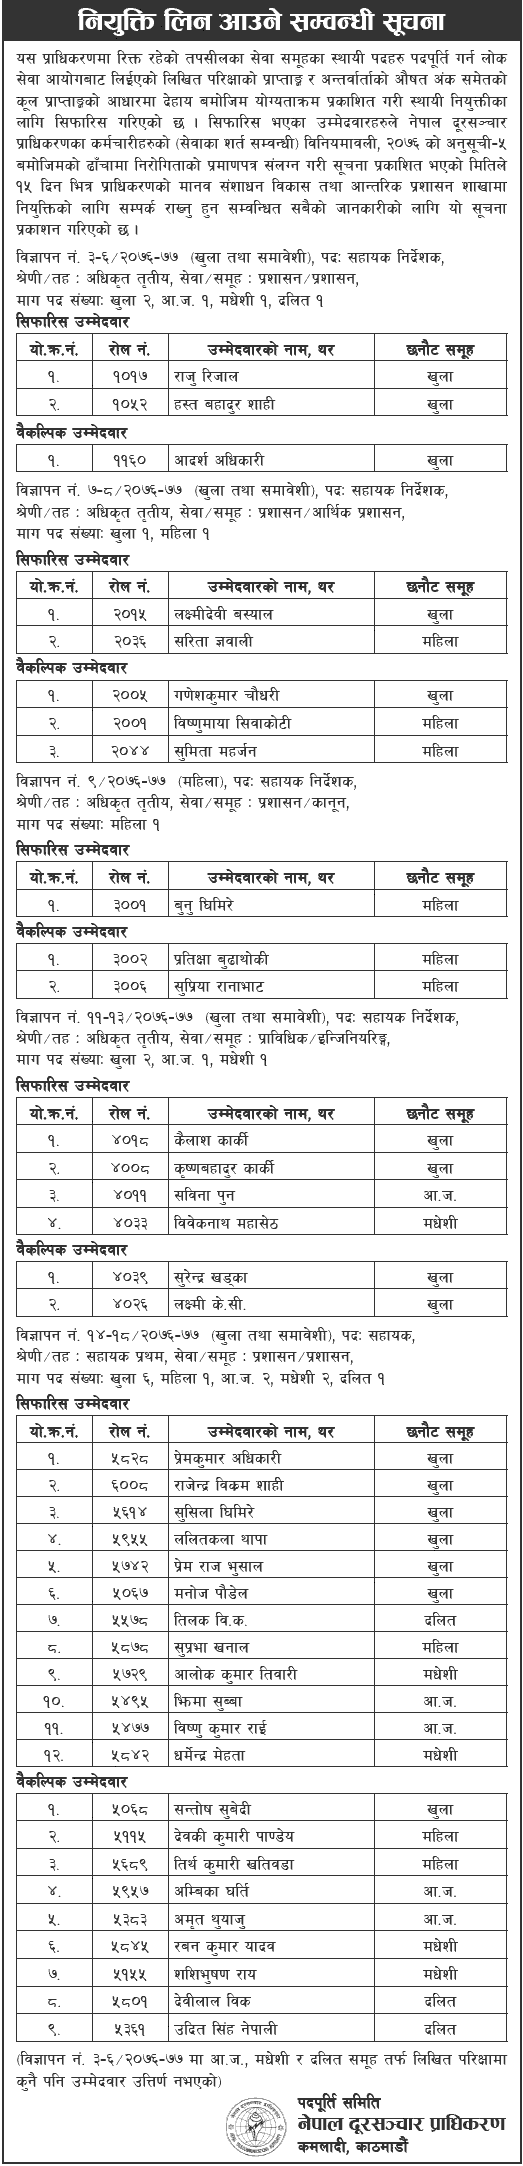 Nepal Telecommunication Authority (NTA) Notice for Appointment